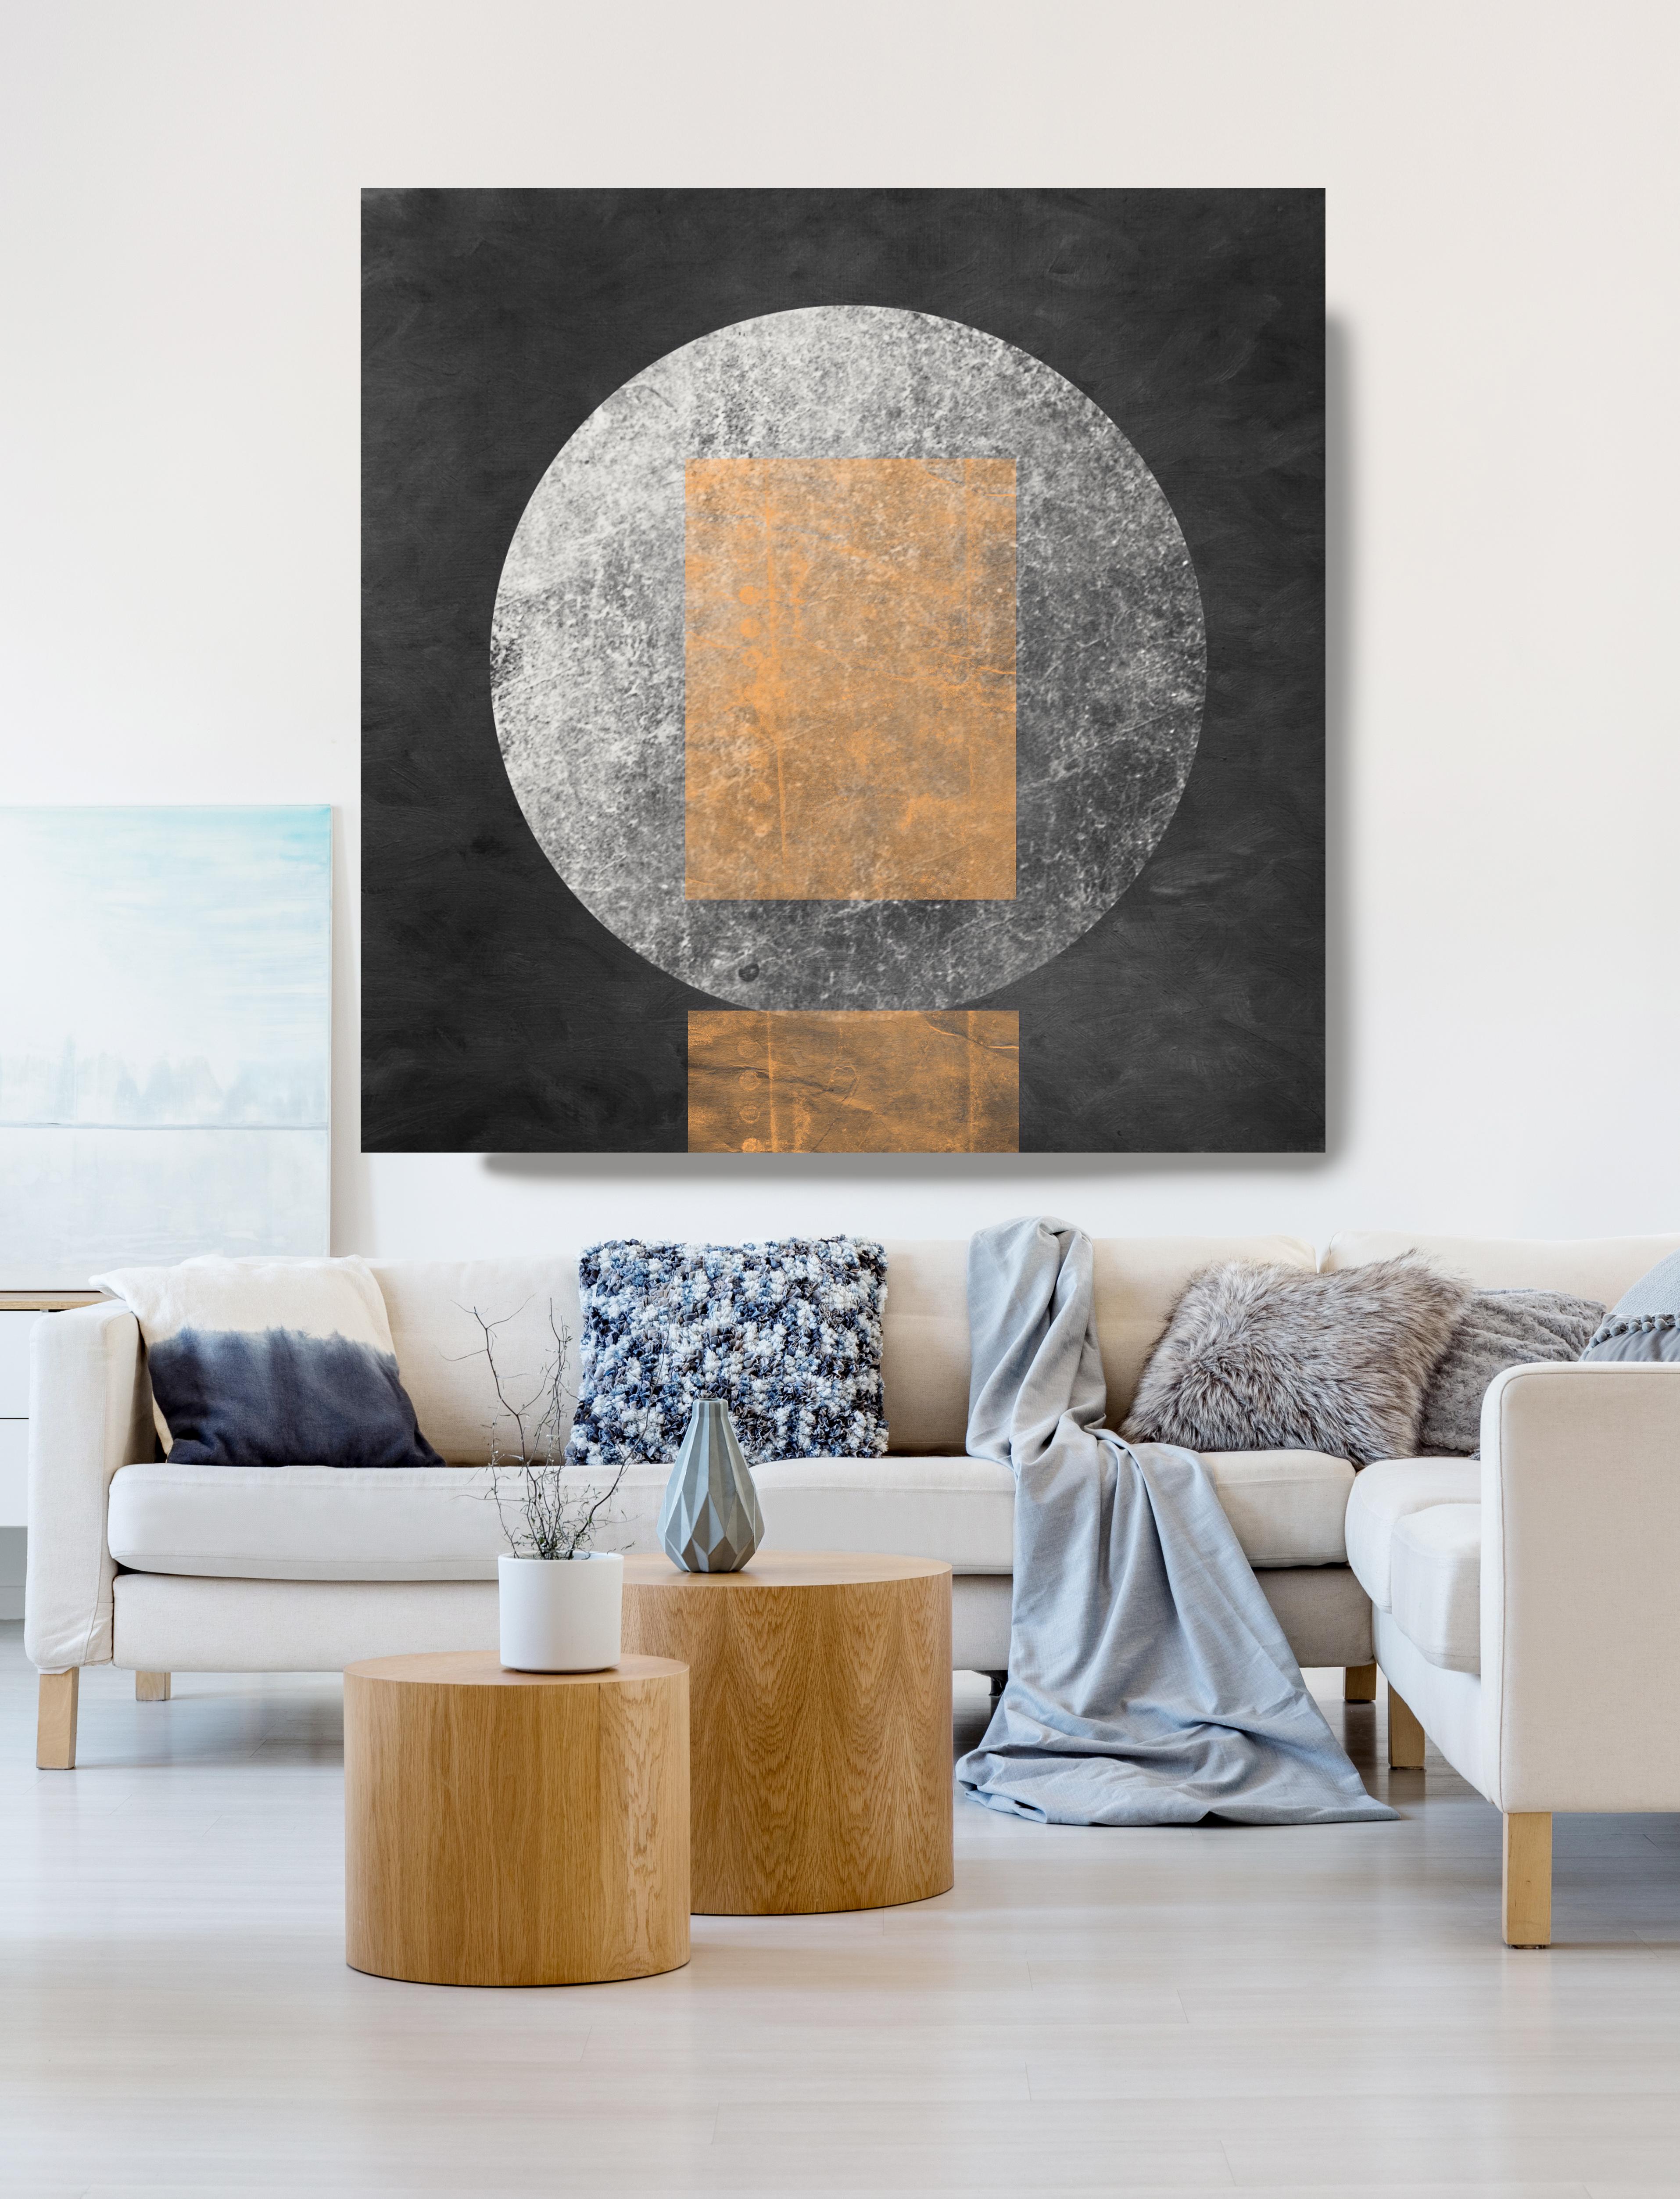 Geometry MYSTERY MOON 22 Mixed Media Painting On Canvas 48 x 48" Astronomy Space